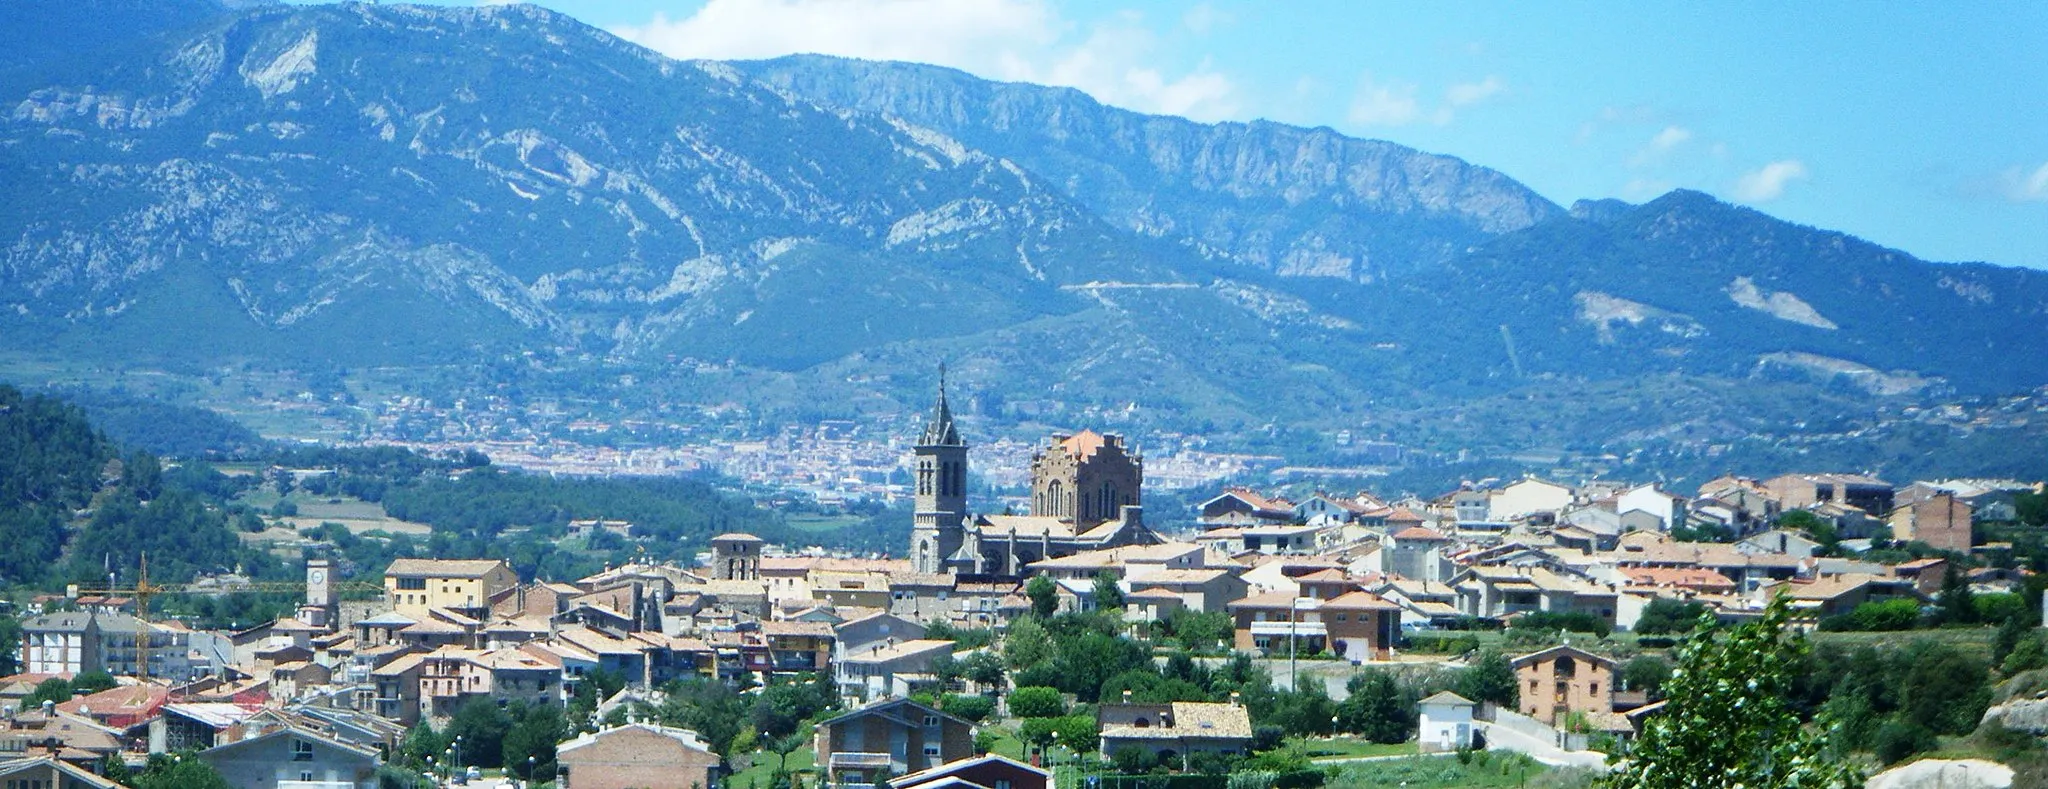 Image of Gironella